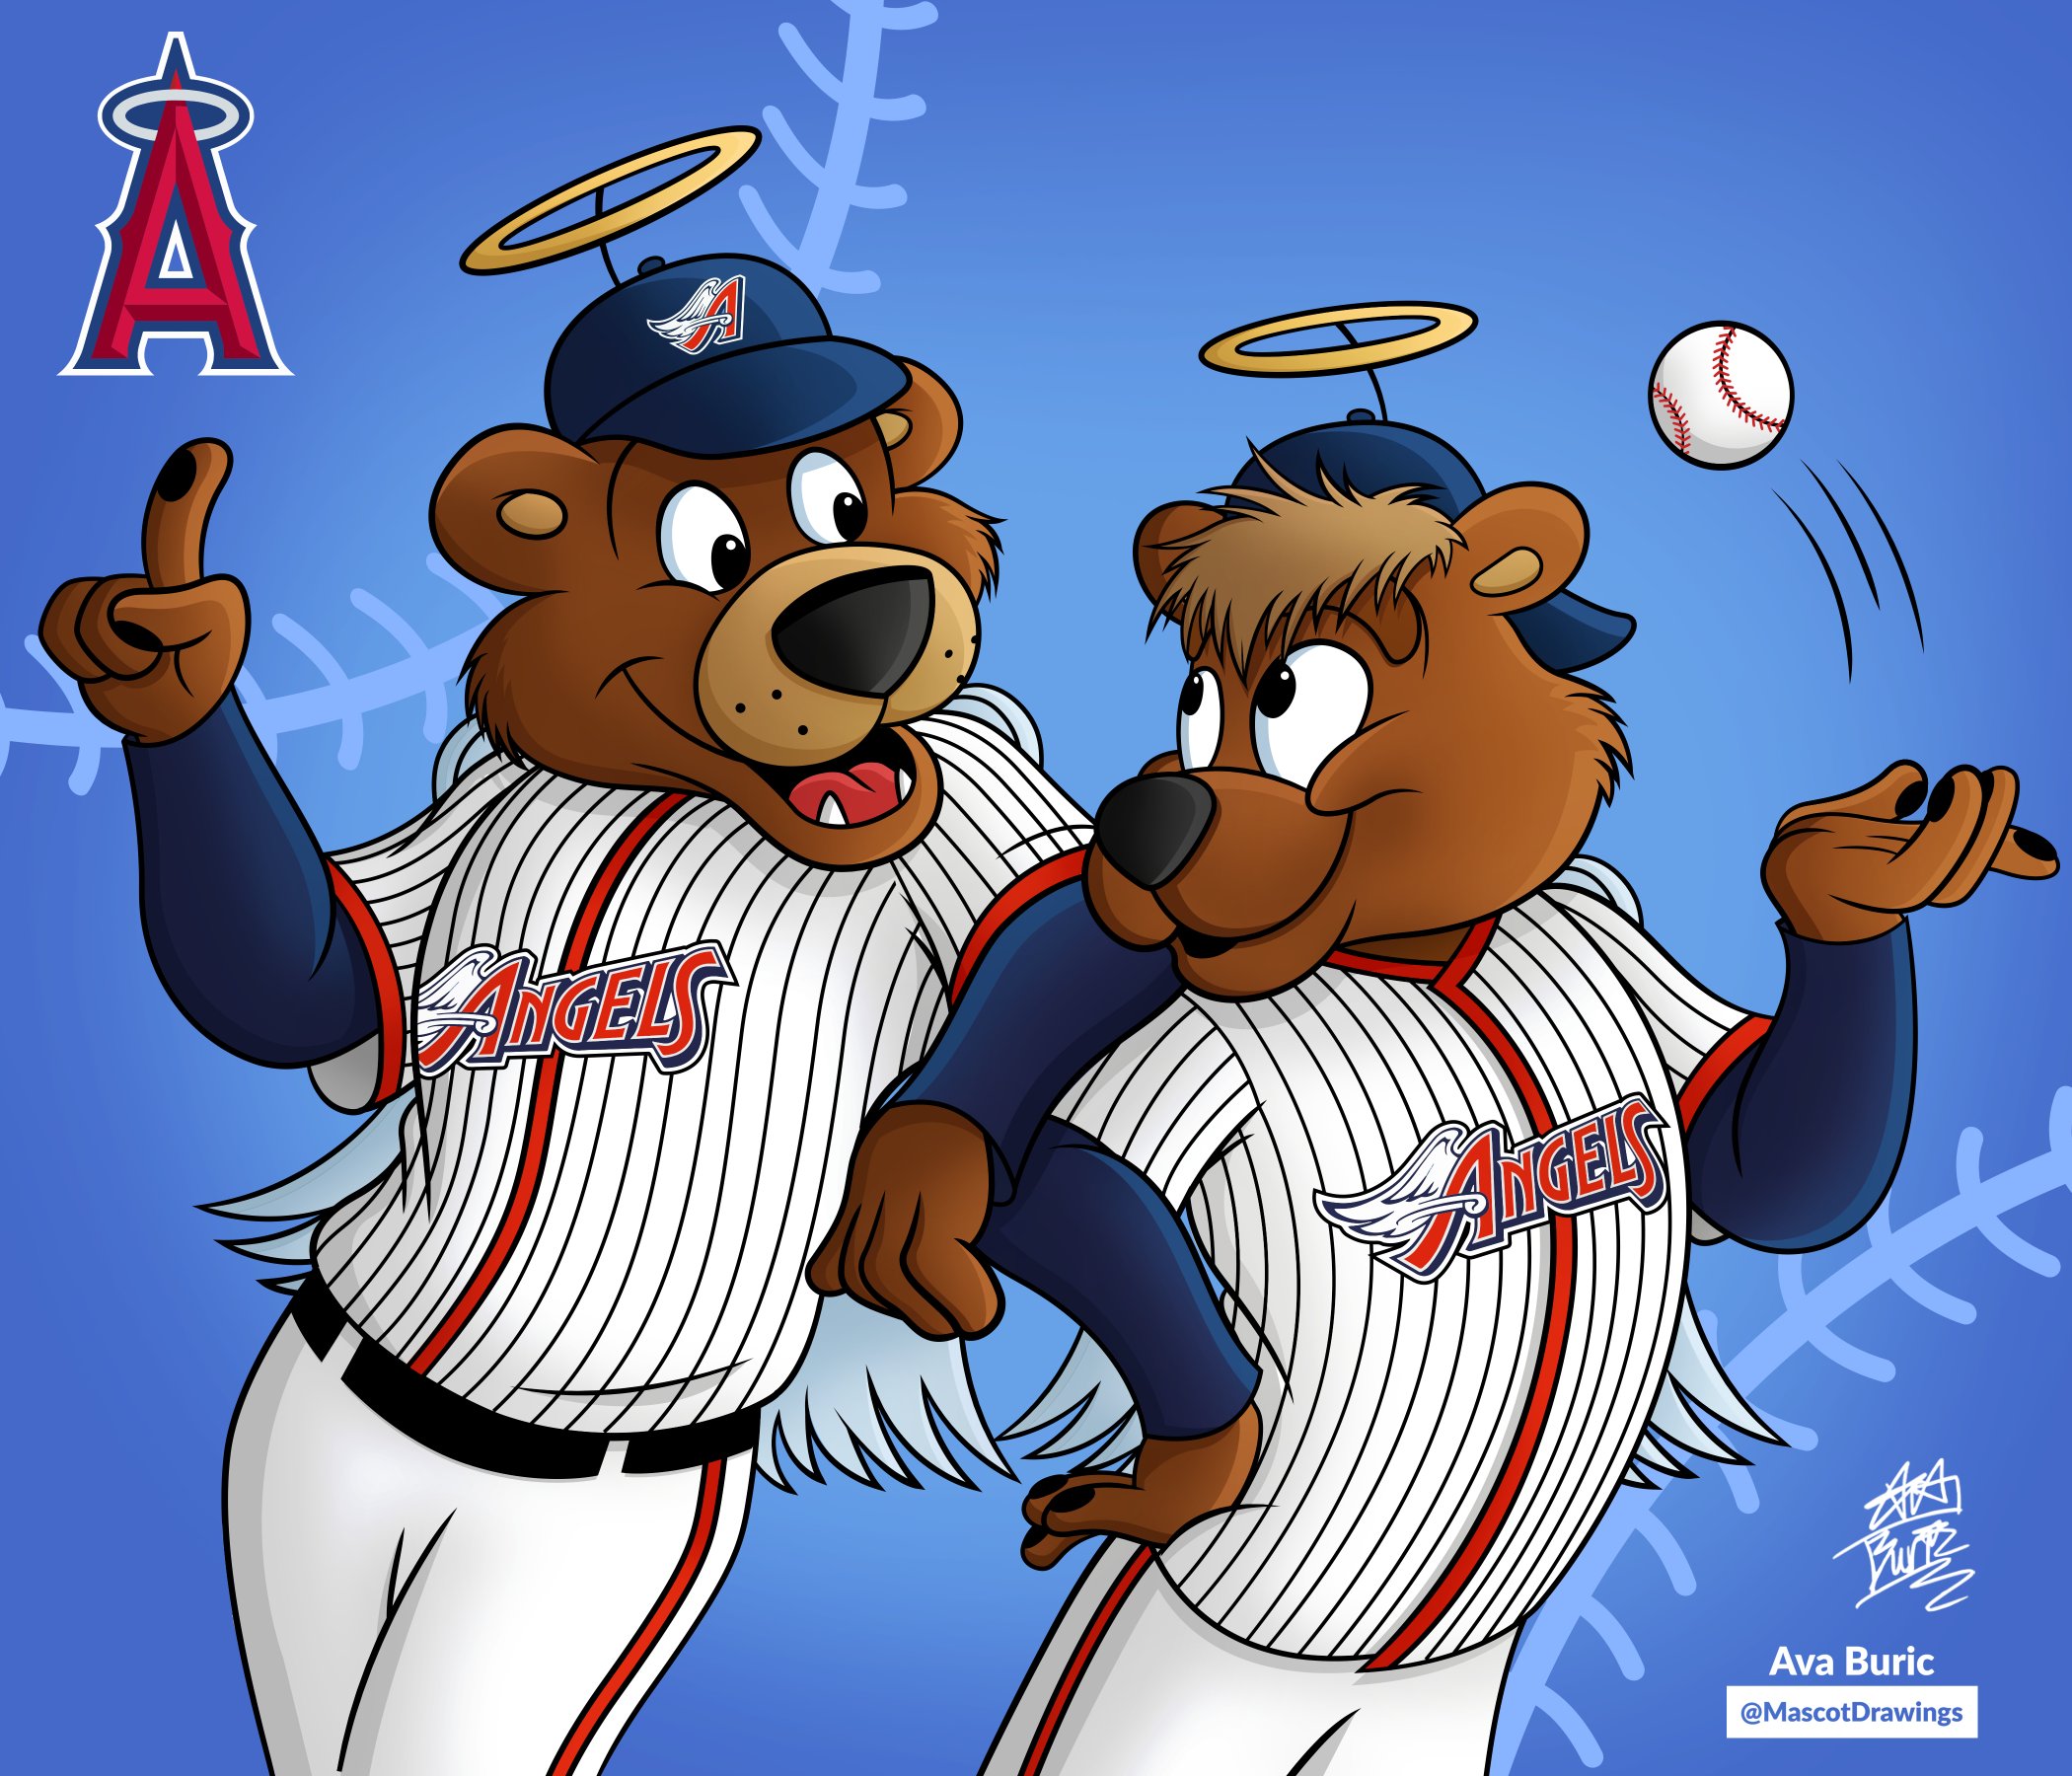 MascotDrawings on X: Celebrating @MLB's #OpeningDay with some new Disney  mascot crossovers! ⚾️ Clutch and Scoop were the former mascots of the @ Angels, right when Disney bought the team. I seriously love